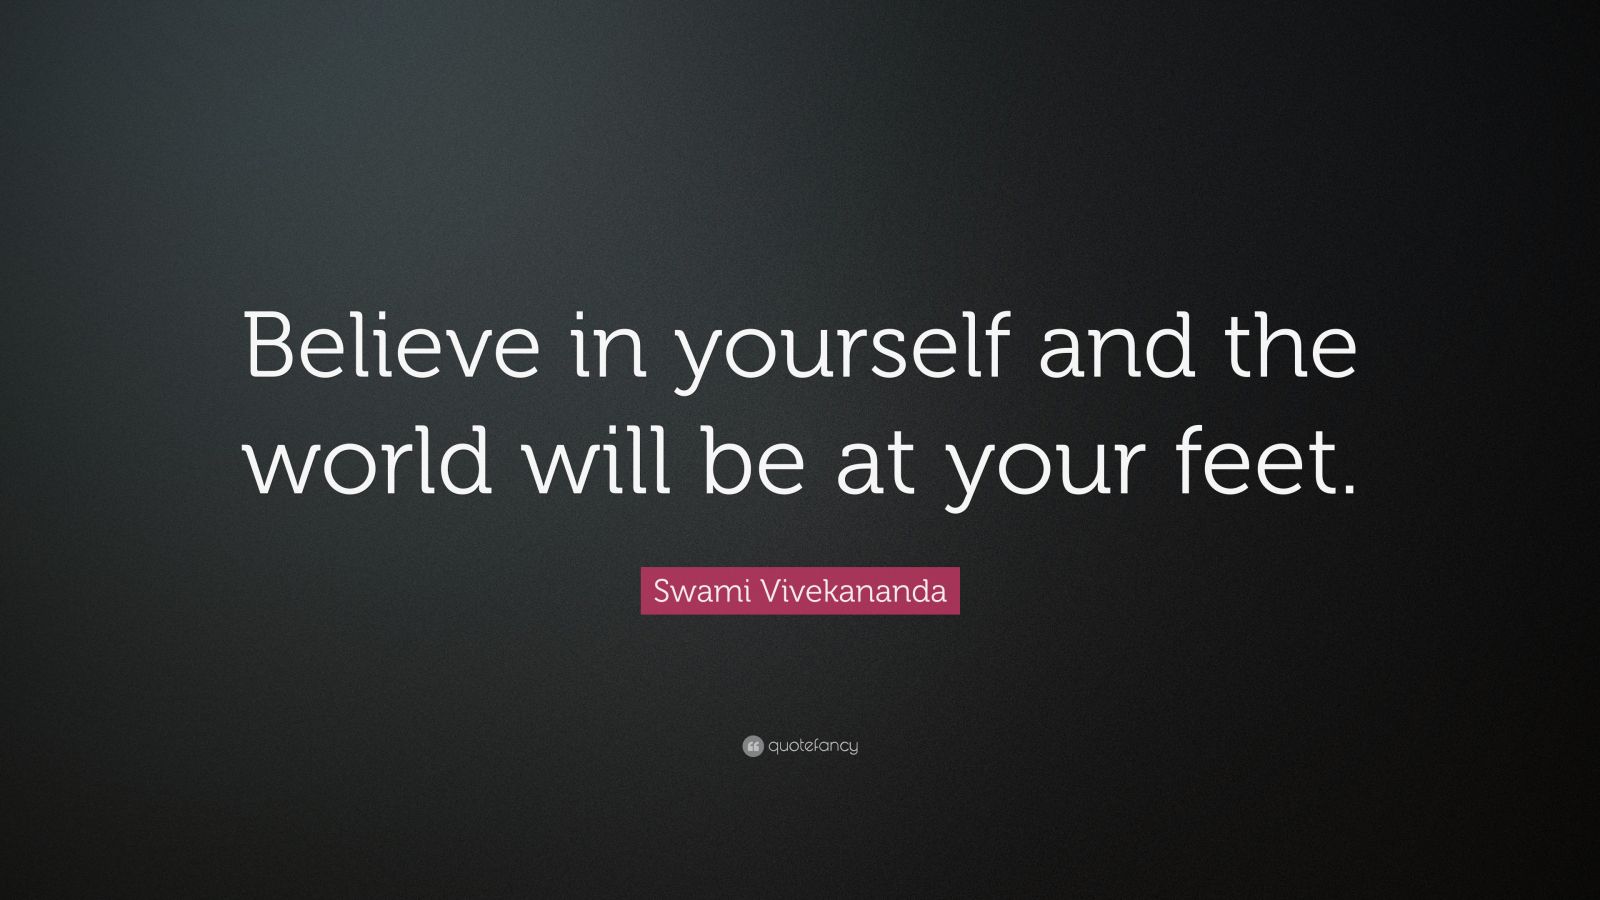 Swami Vivekananda Quotes - Believe In Yourself And The World Will , HD Wallpaper & Backgrounds